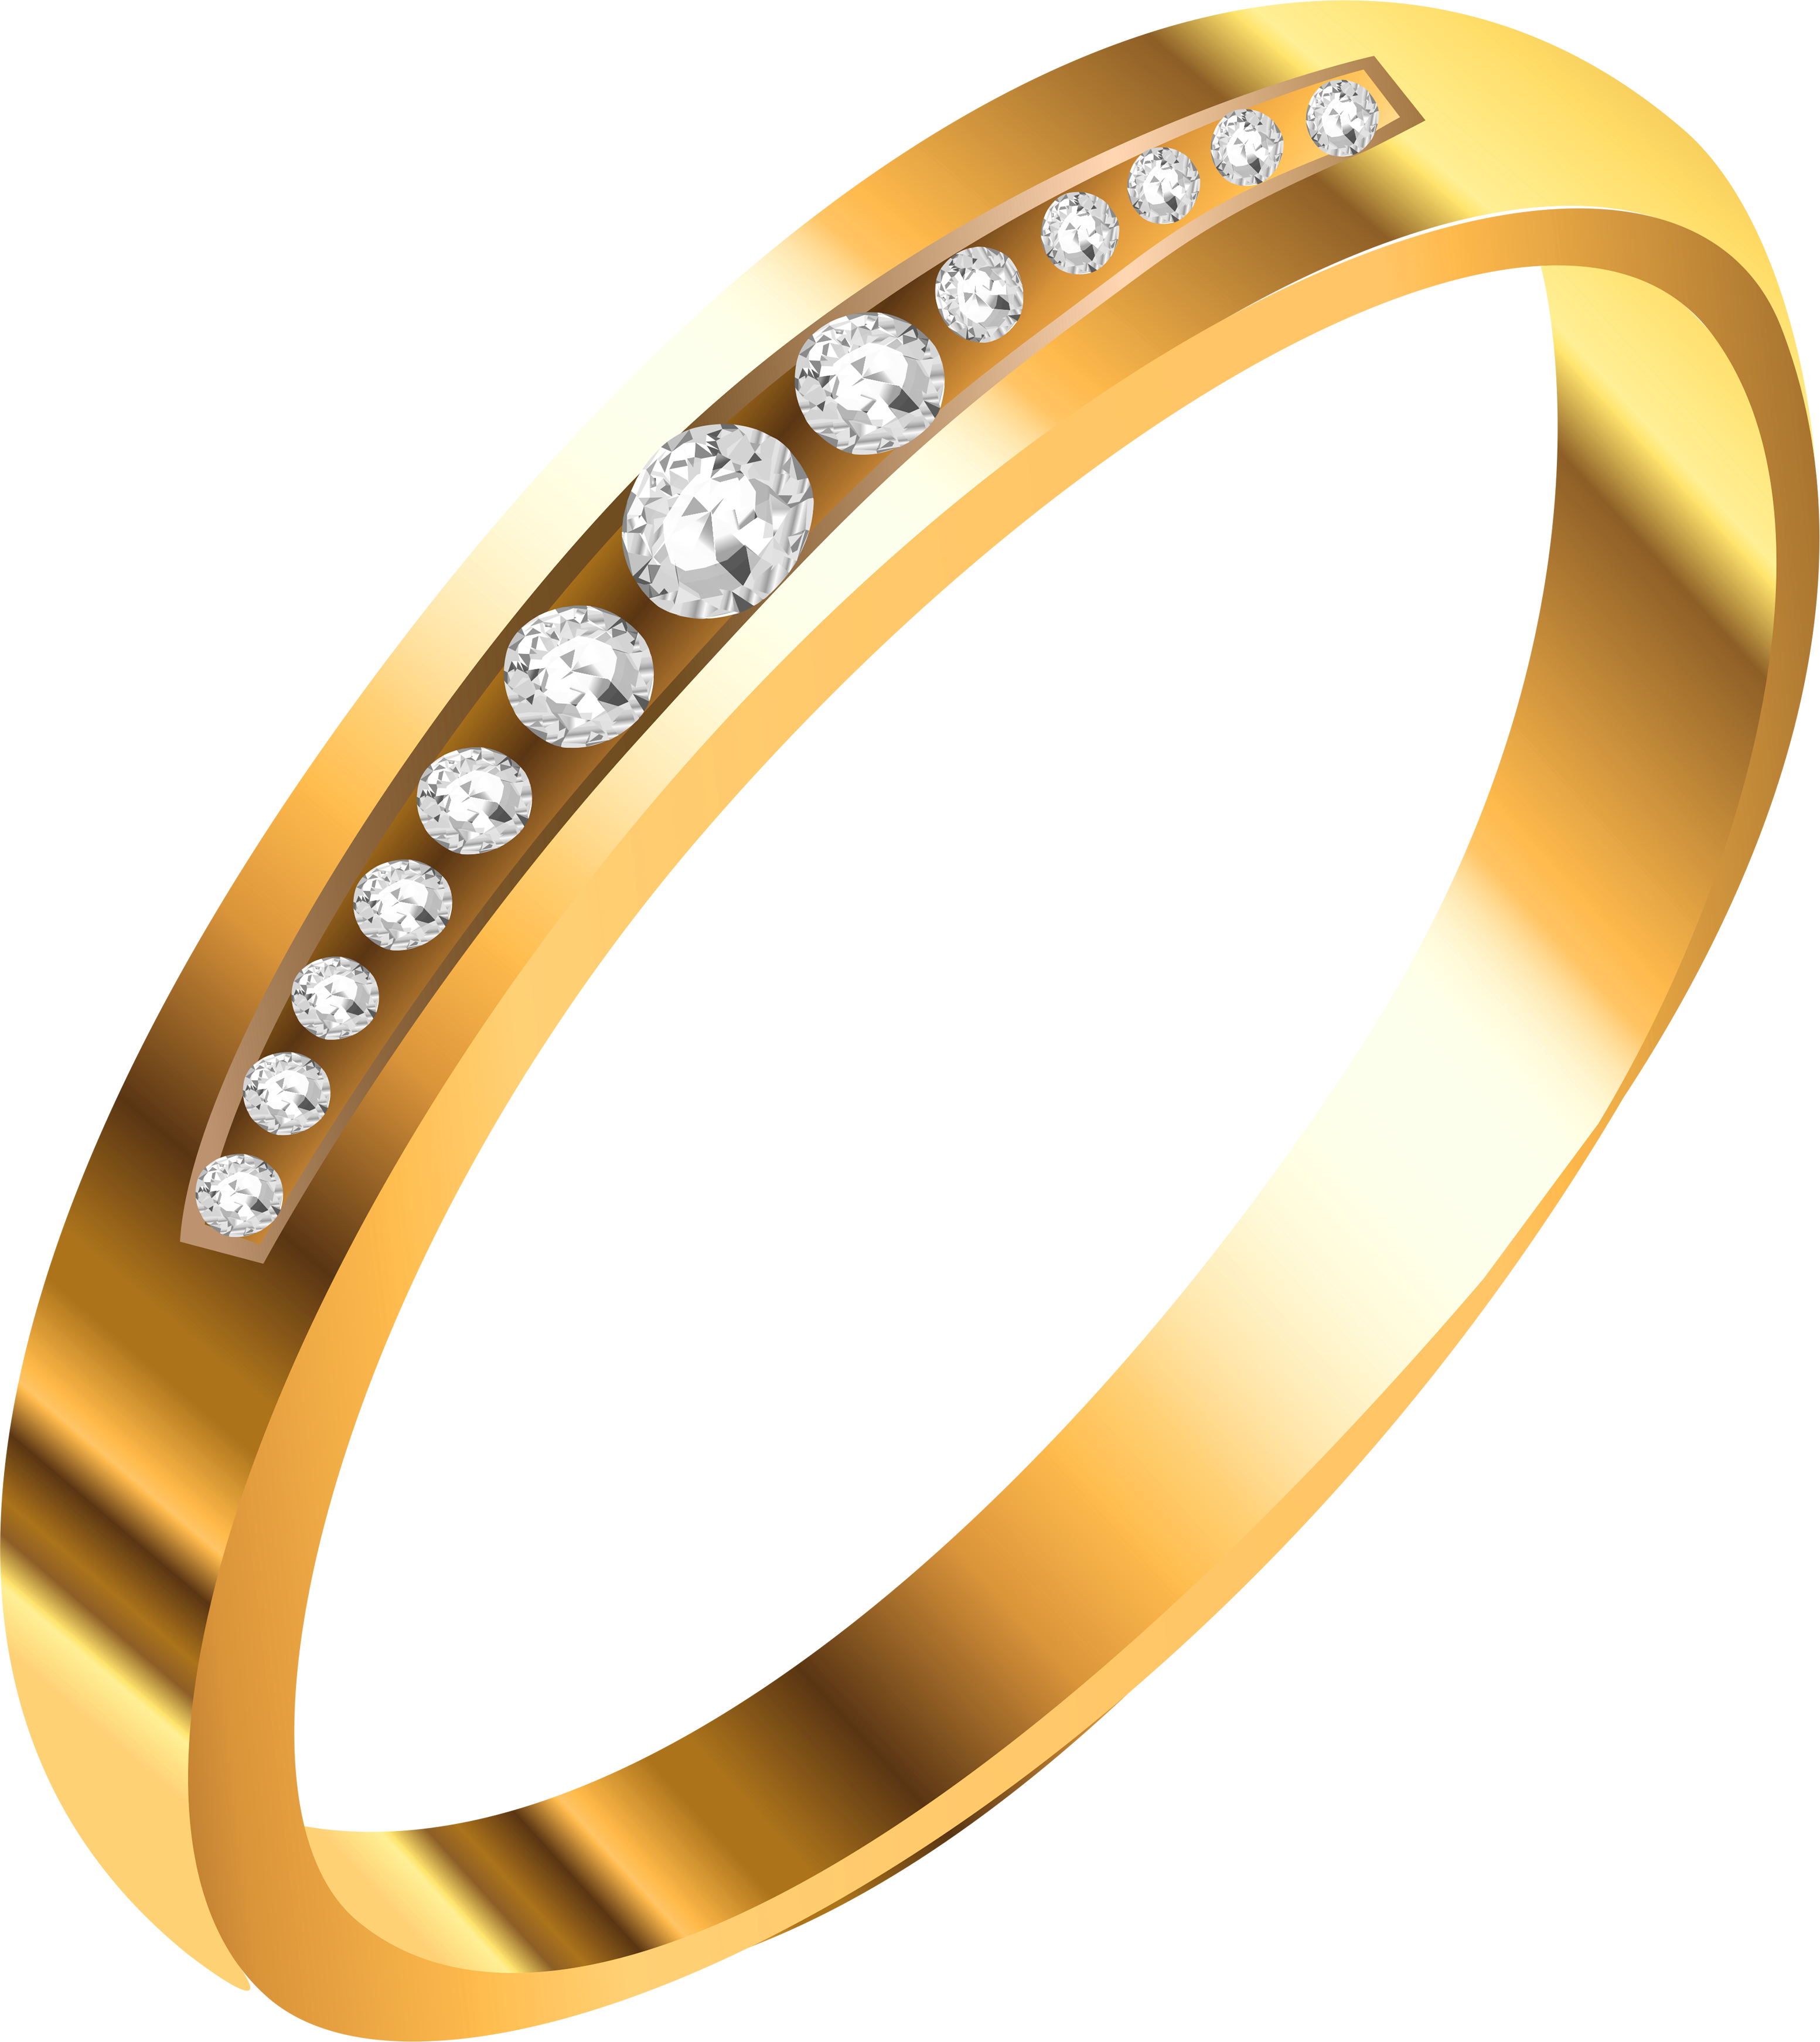 Jewellery Gold Ring Transparent Image